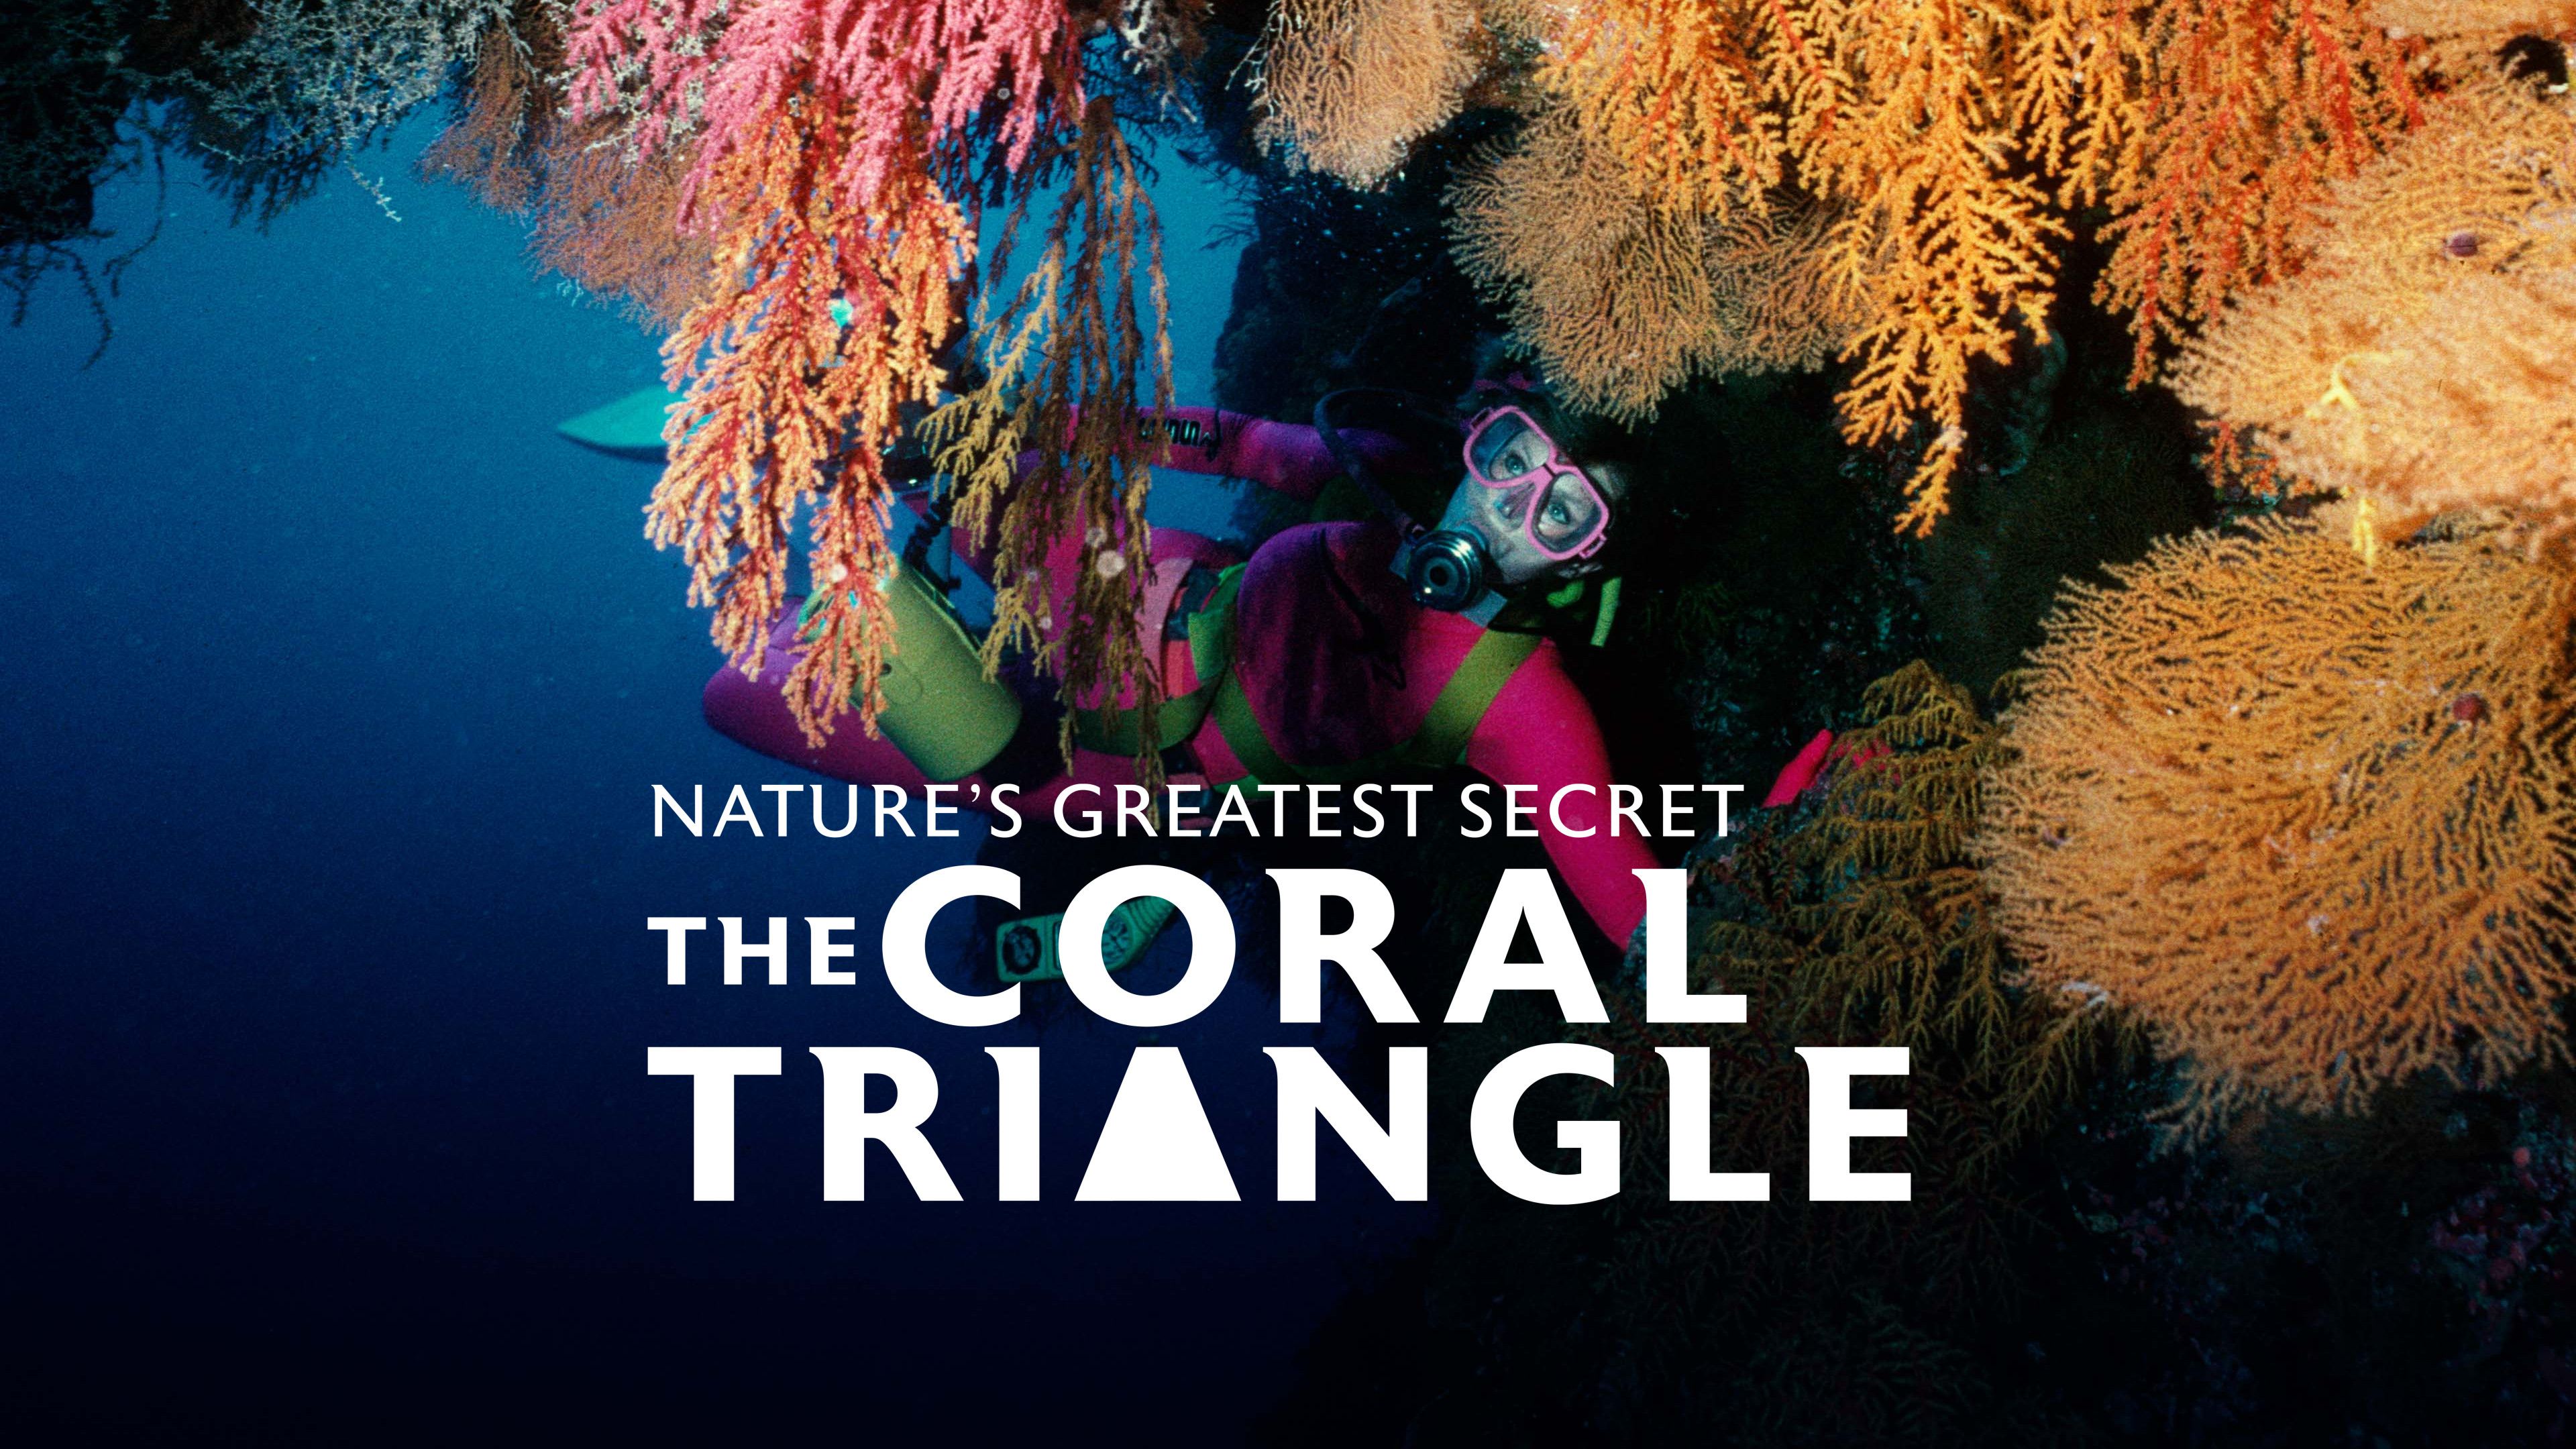 Nature's Greatest Secret - The Coral Triangle